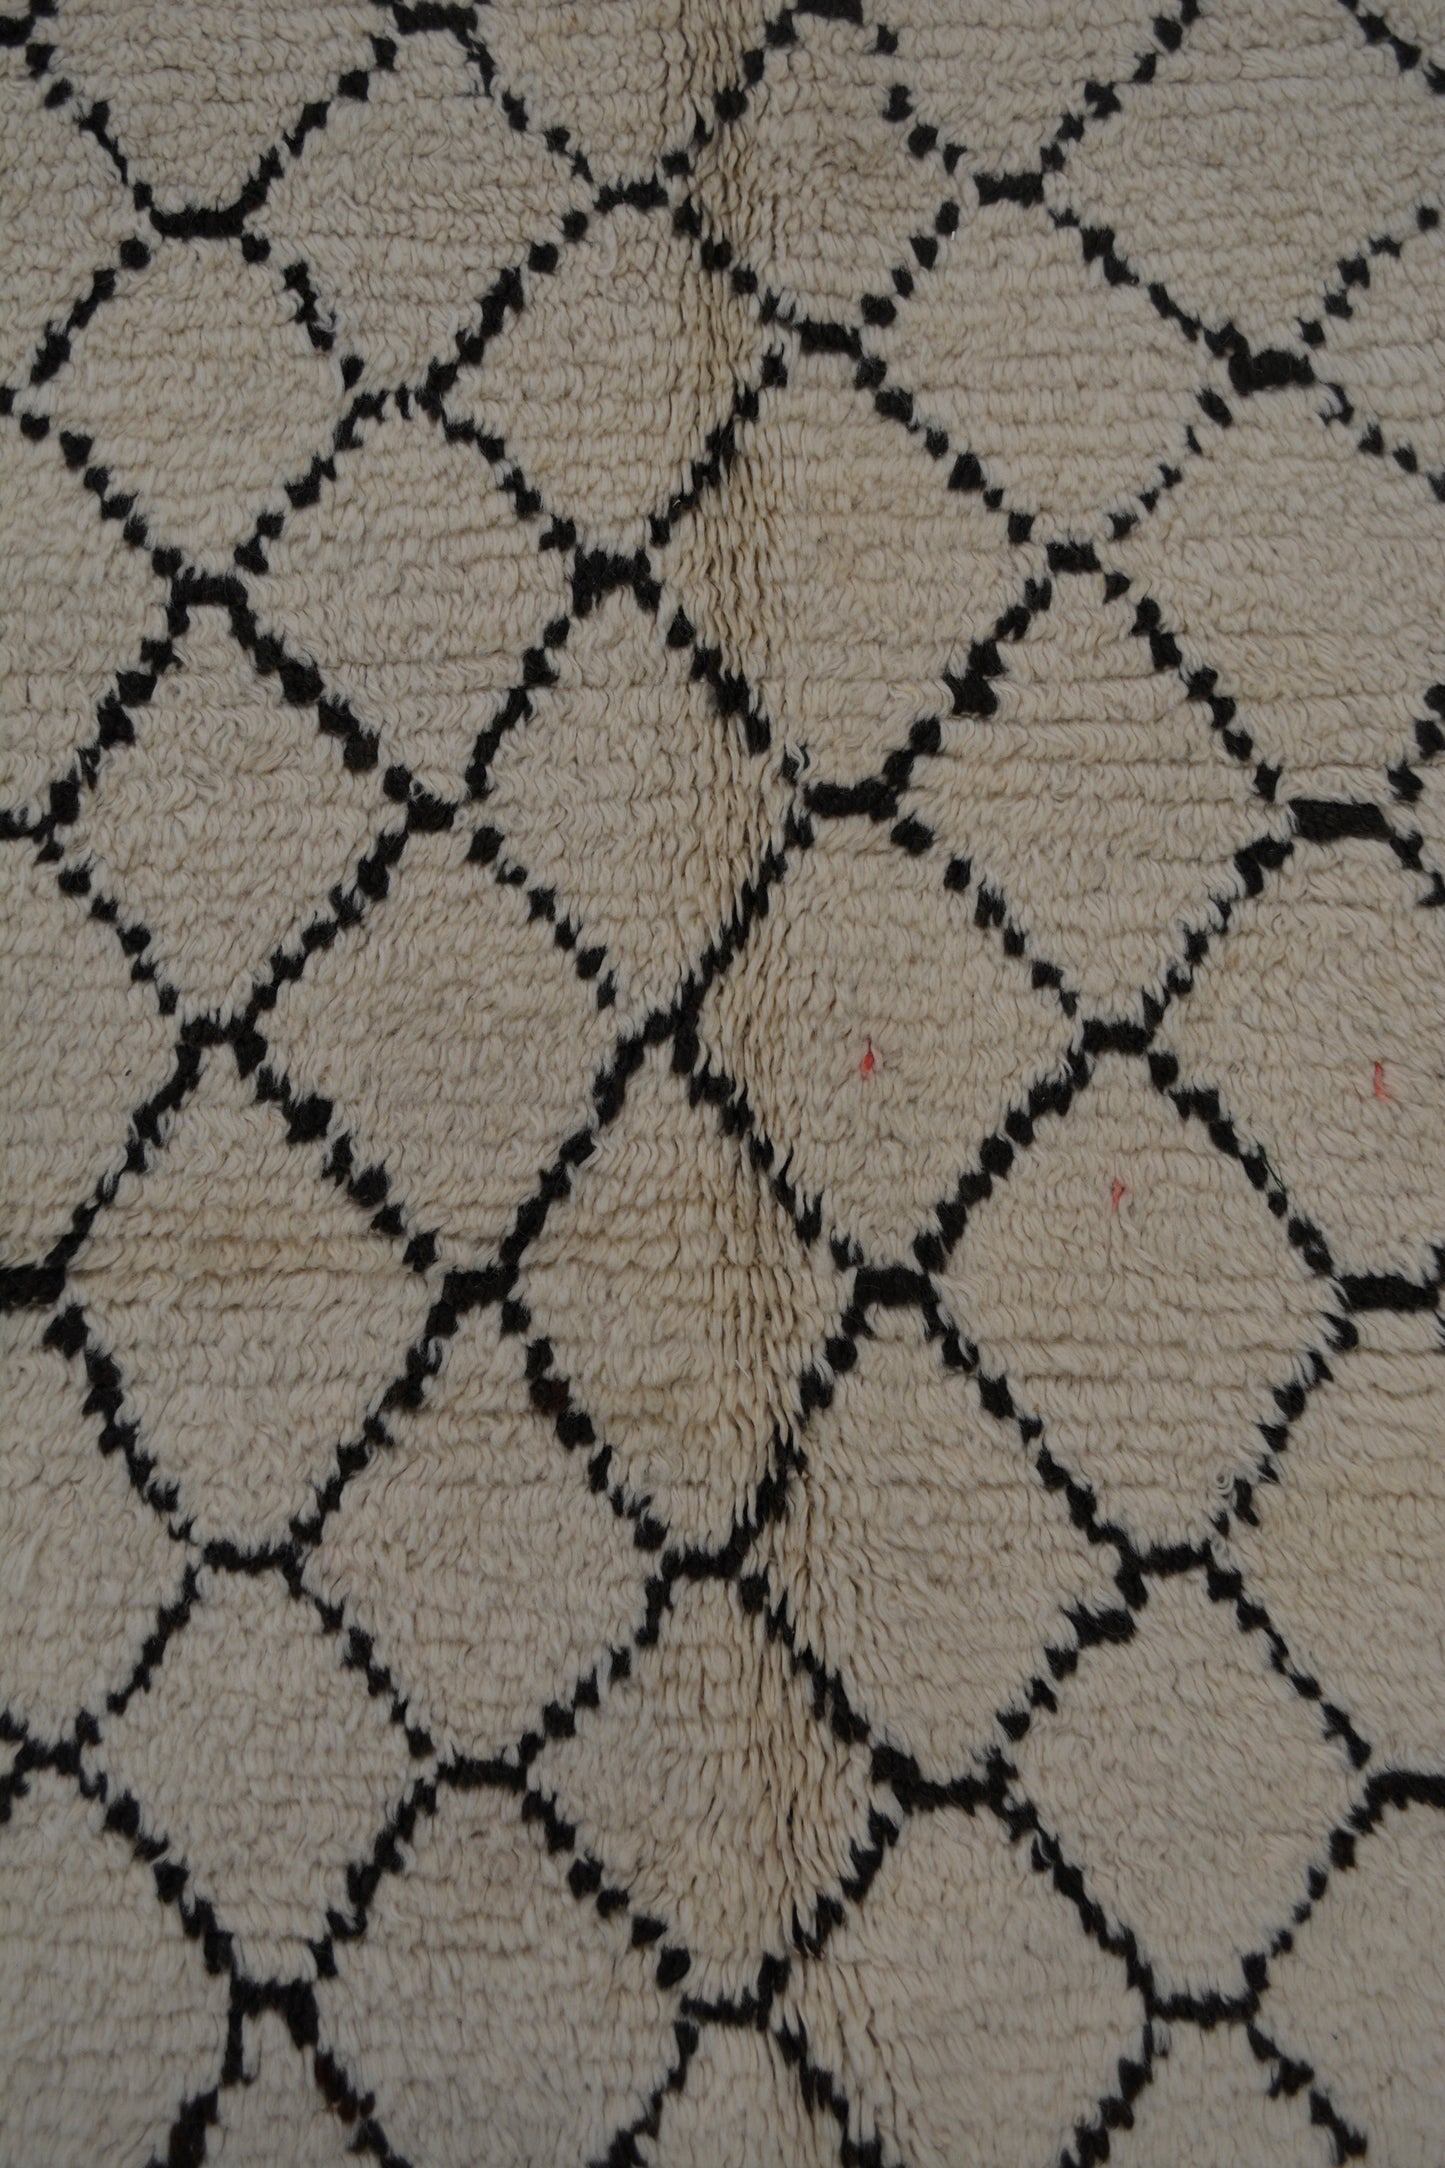 The close up of the center of the rug displays outline rhombuses next to each other.